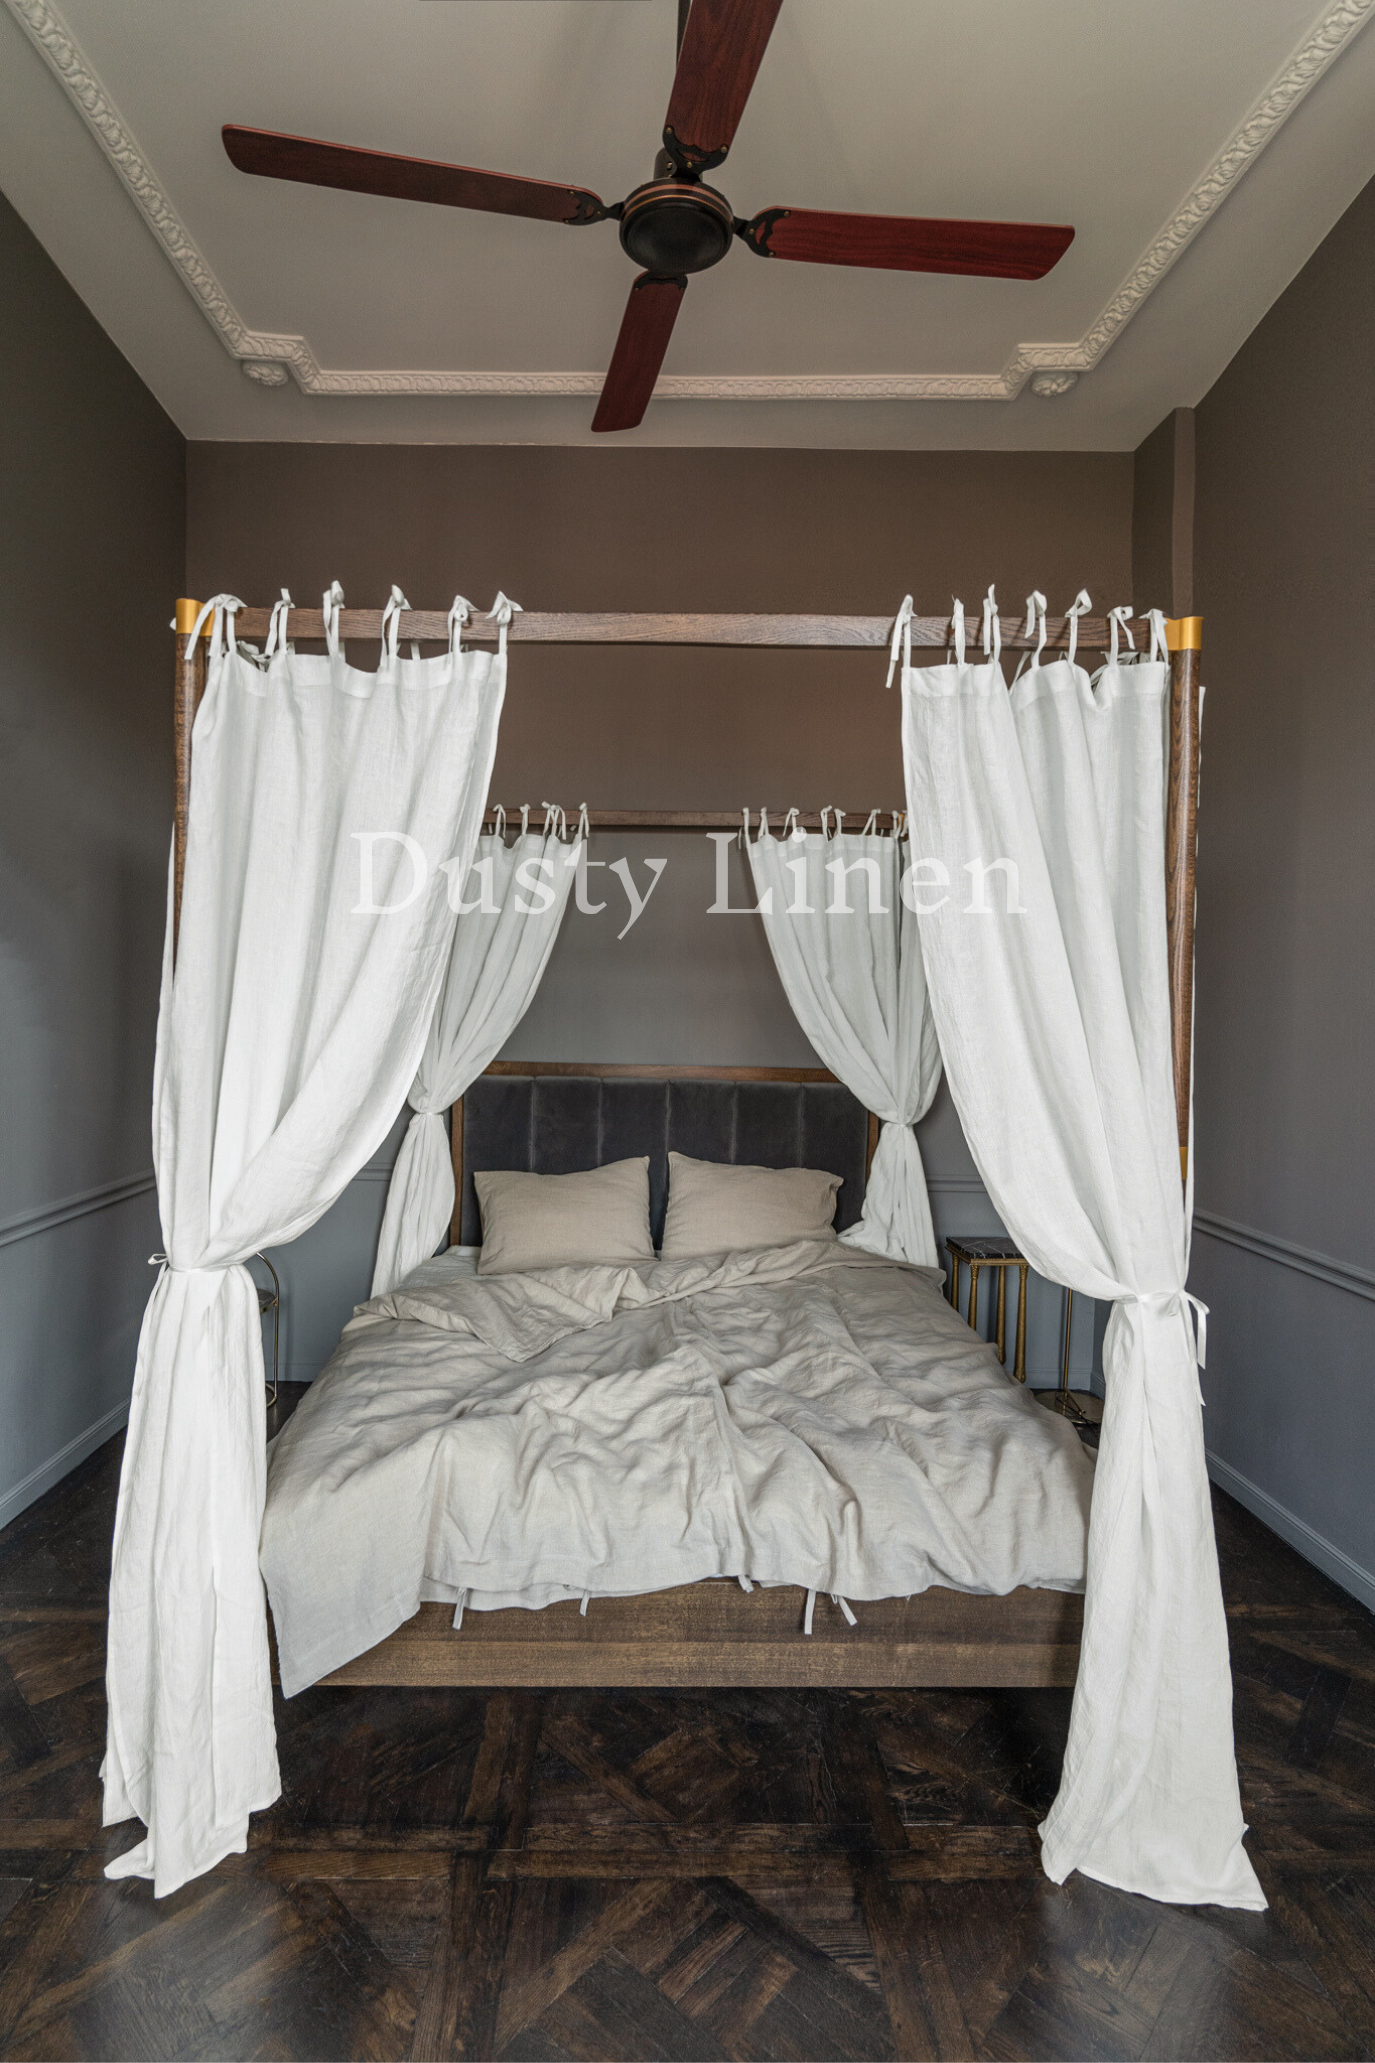 Canopy bed linen curtains with ties in White color-Dusty Linen-#original_alt_text#-